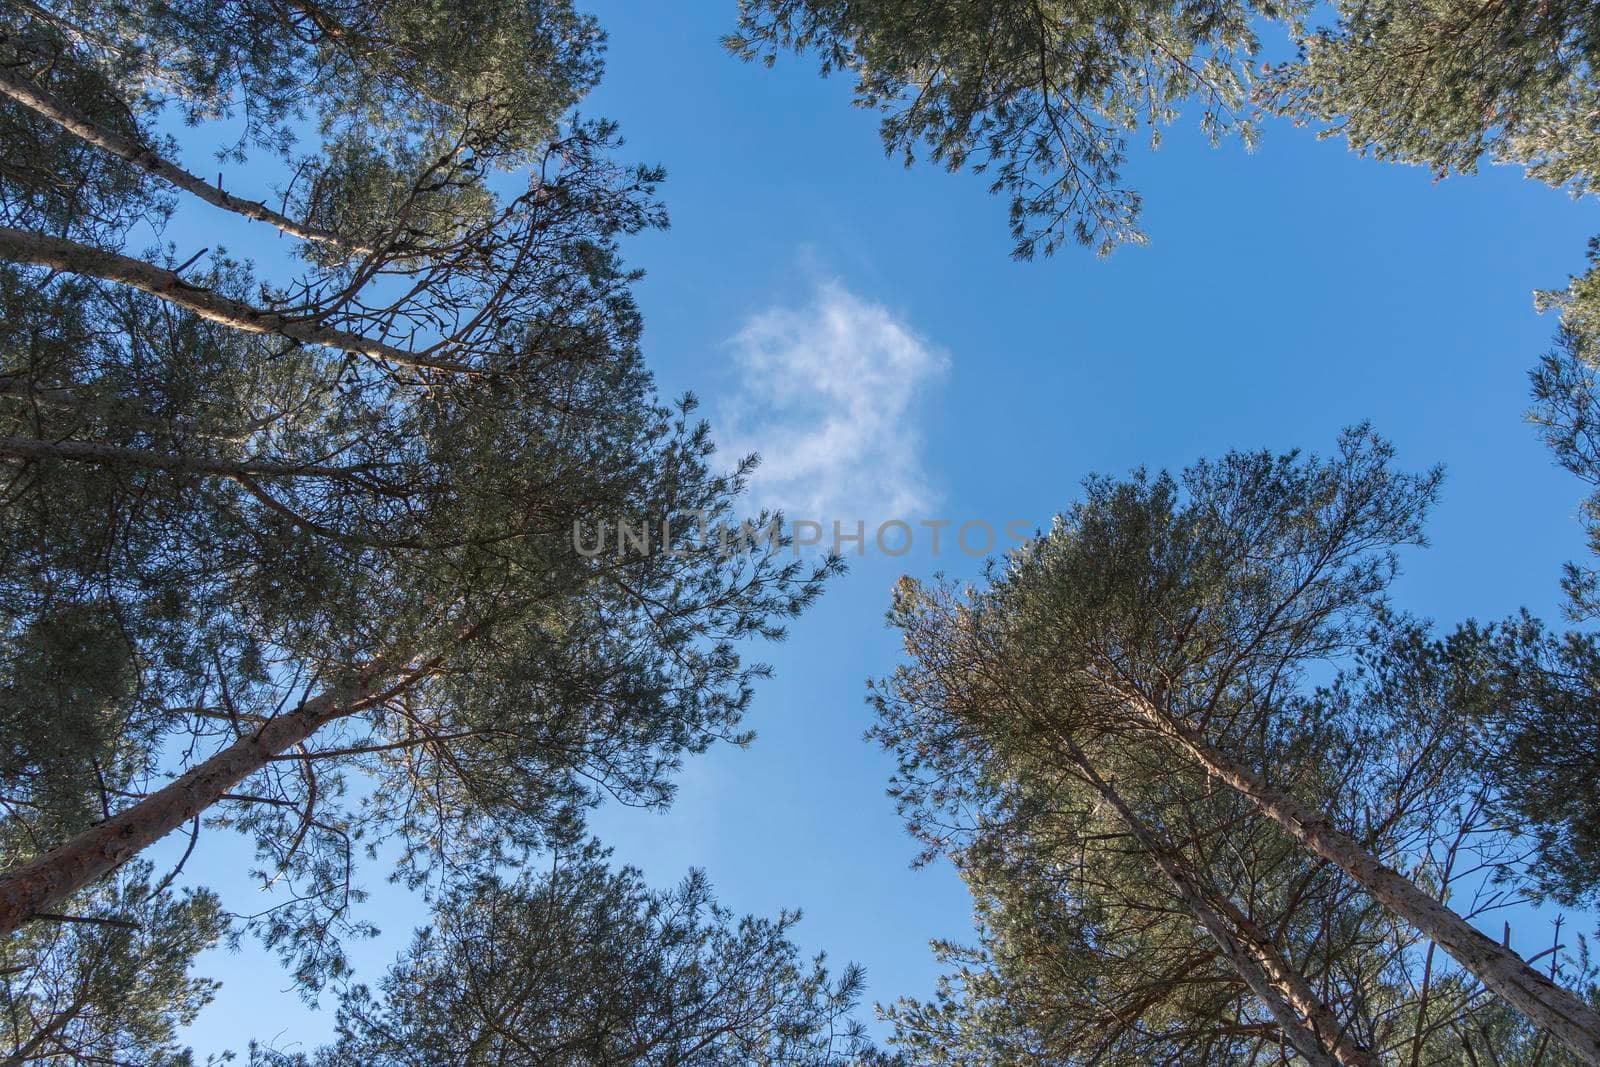 A small, white cloud hangs between the high tops of the pines